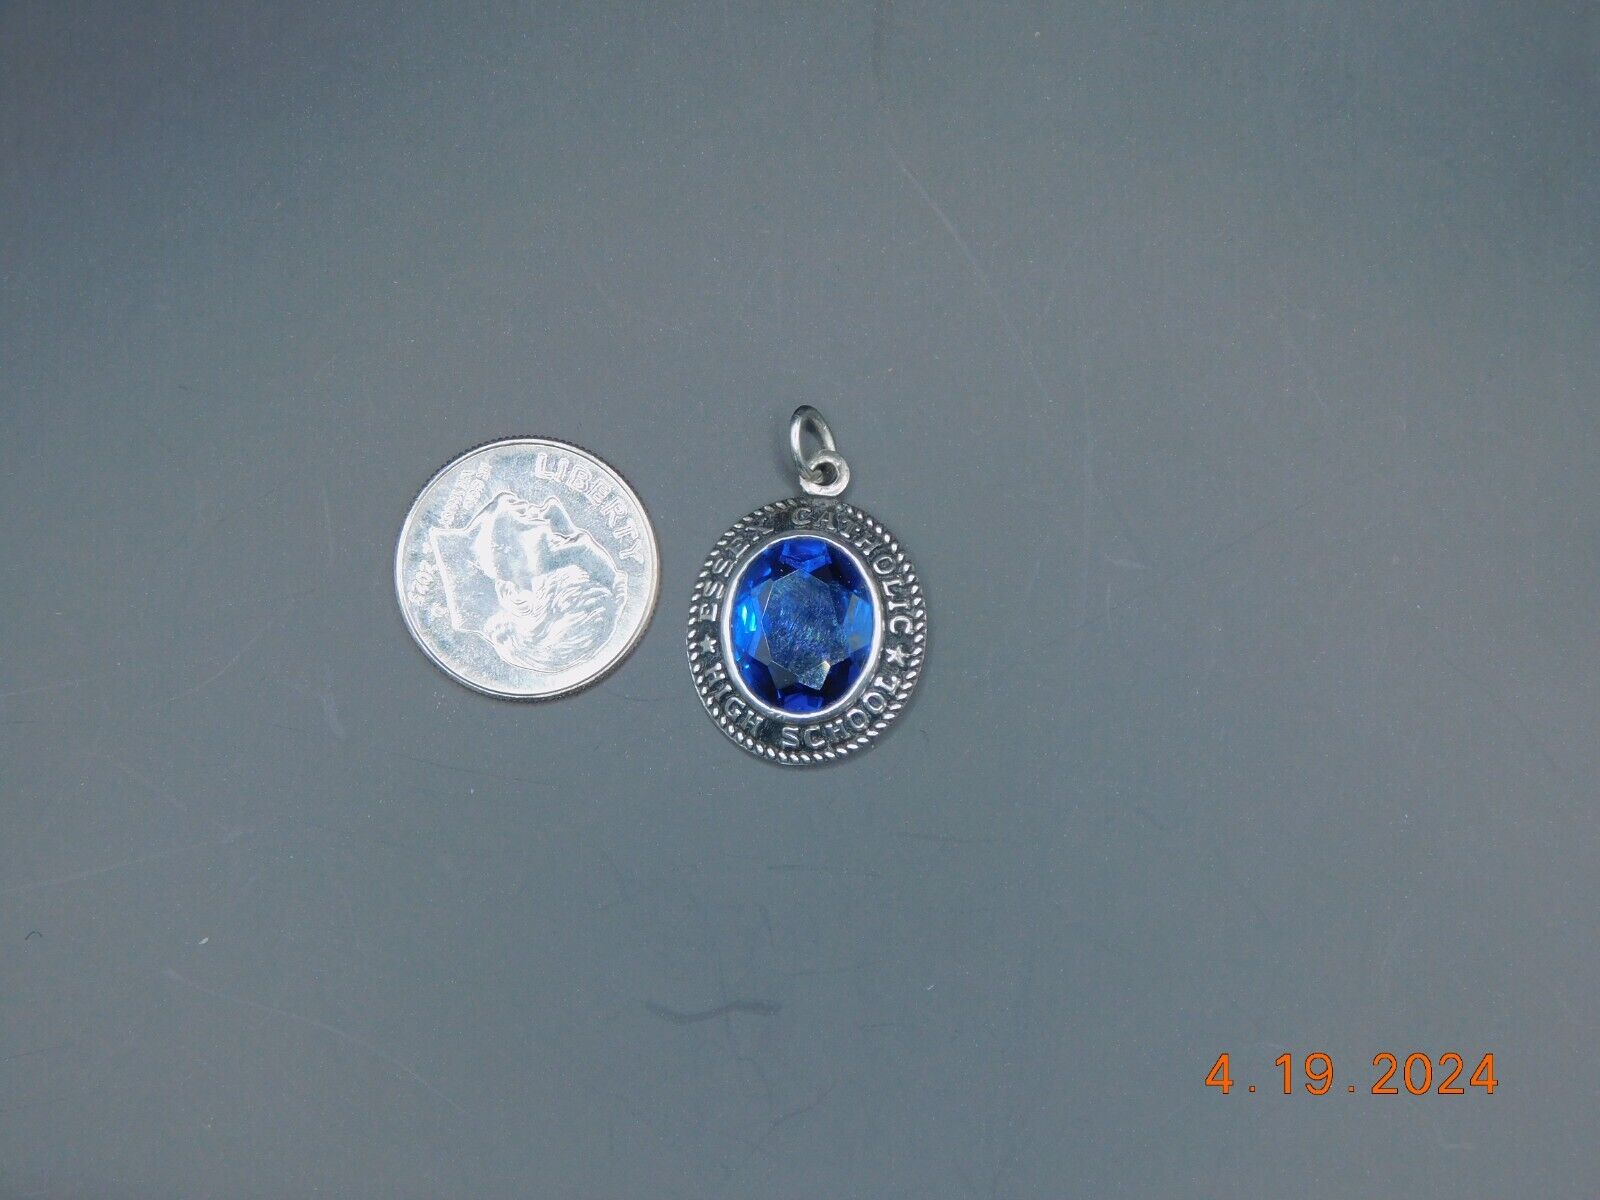 1967 Essex Catholic High School Sterling Silver & Blue Spinel Pendant - '67 Prom